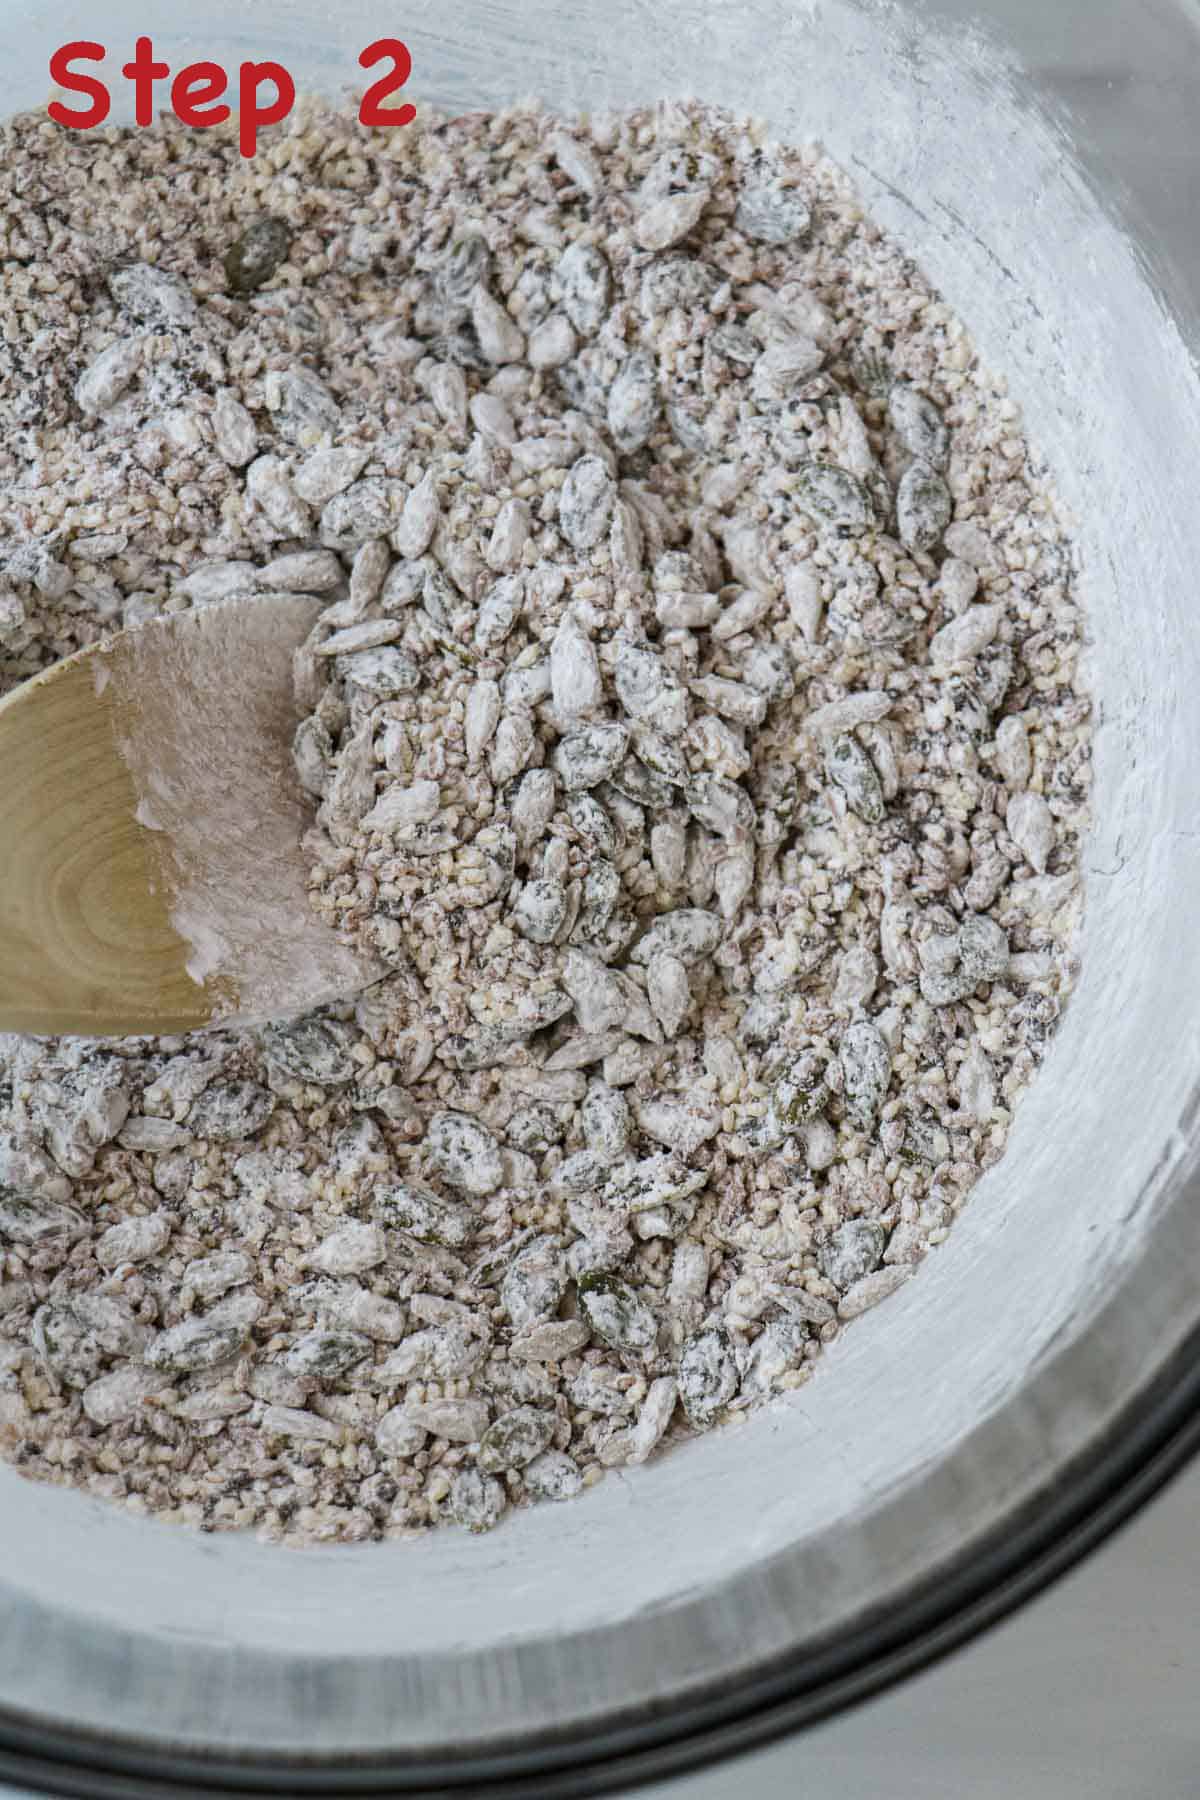 Seed cracker dry ingredients stirred together in a bowl with a wooden spoon.